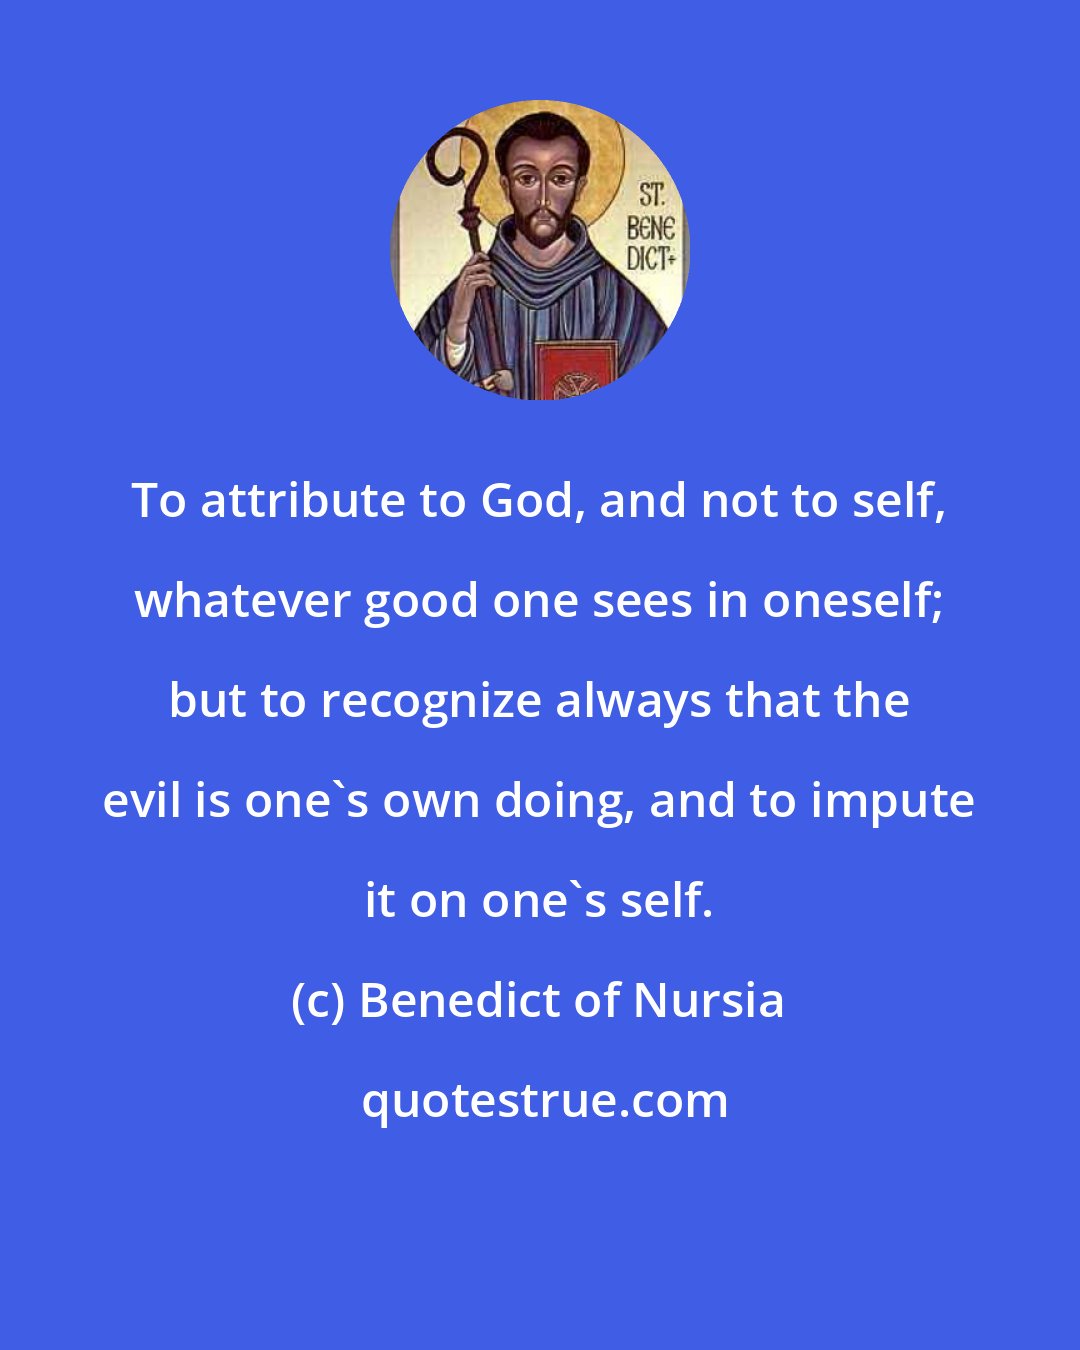 Benedict of Nursia: To attribute to God, and not to self, whatever good one sees in oneself; but to recognize always that the evil is one's own doing, and to impute it on one's self.